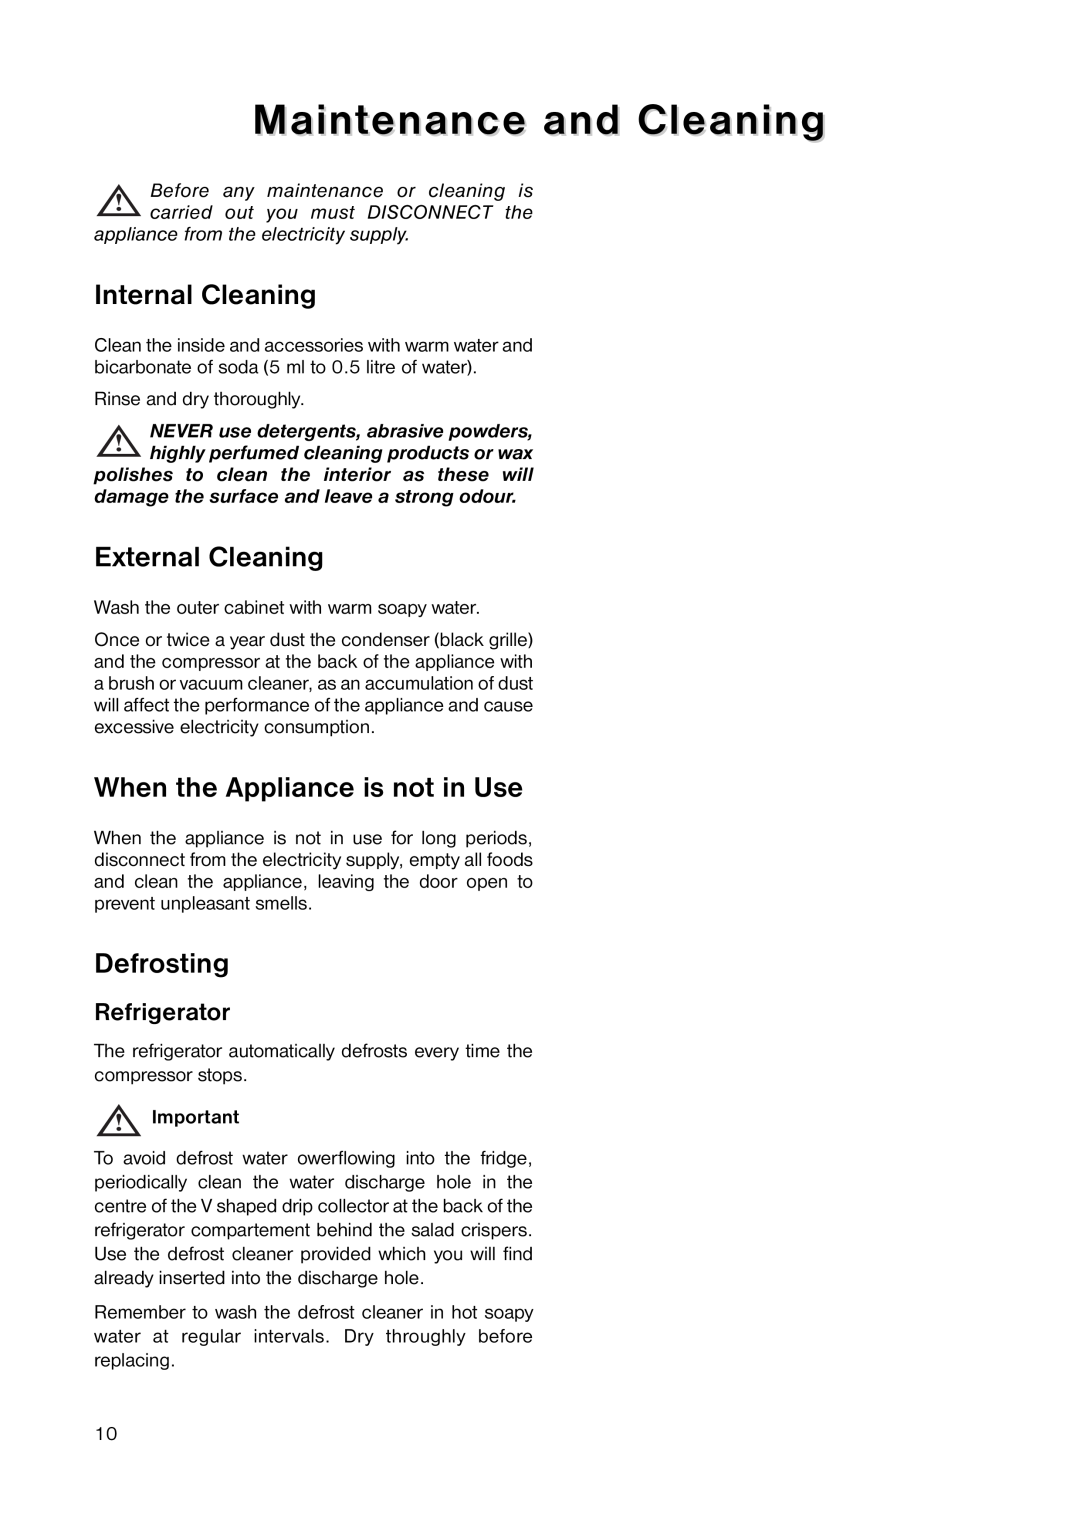 Electrolux ENB 3440 manual Maintenance and Cleaning, Internal Cleaning, External Cleaning, When the Appliance is not in Use 